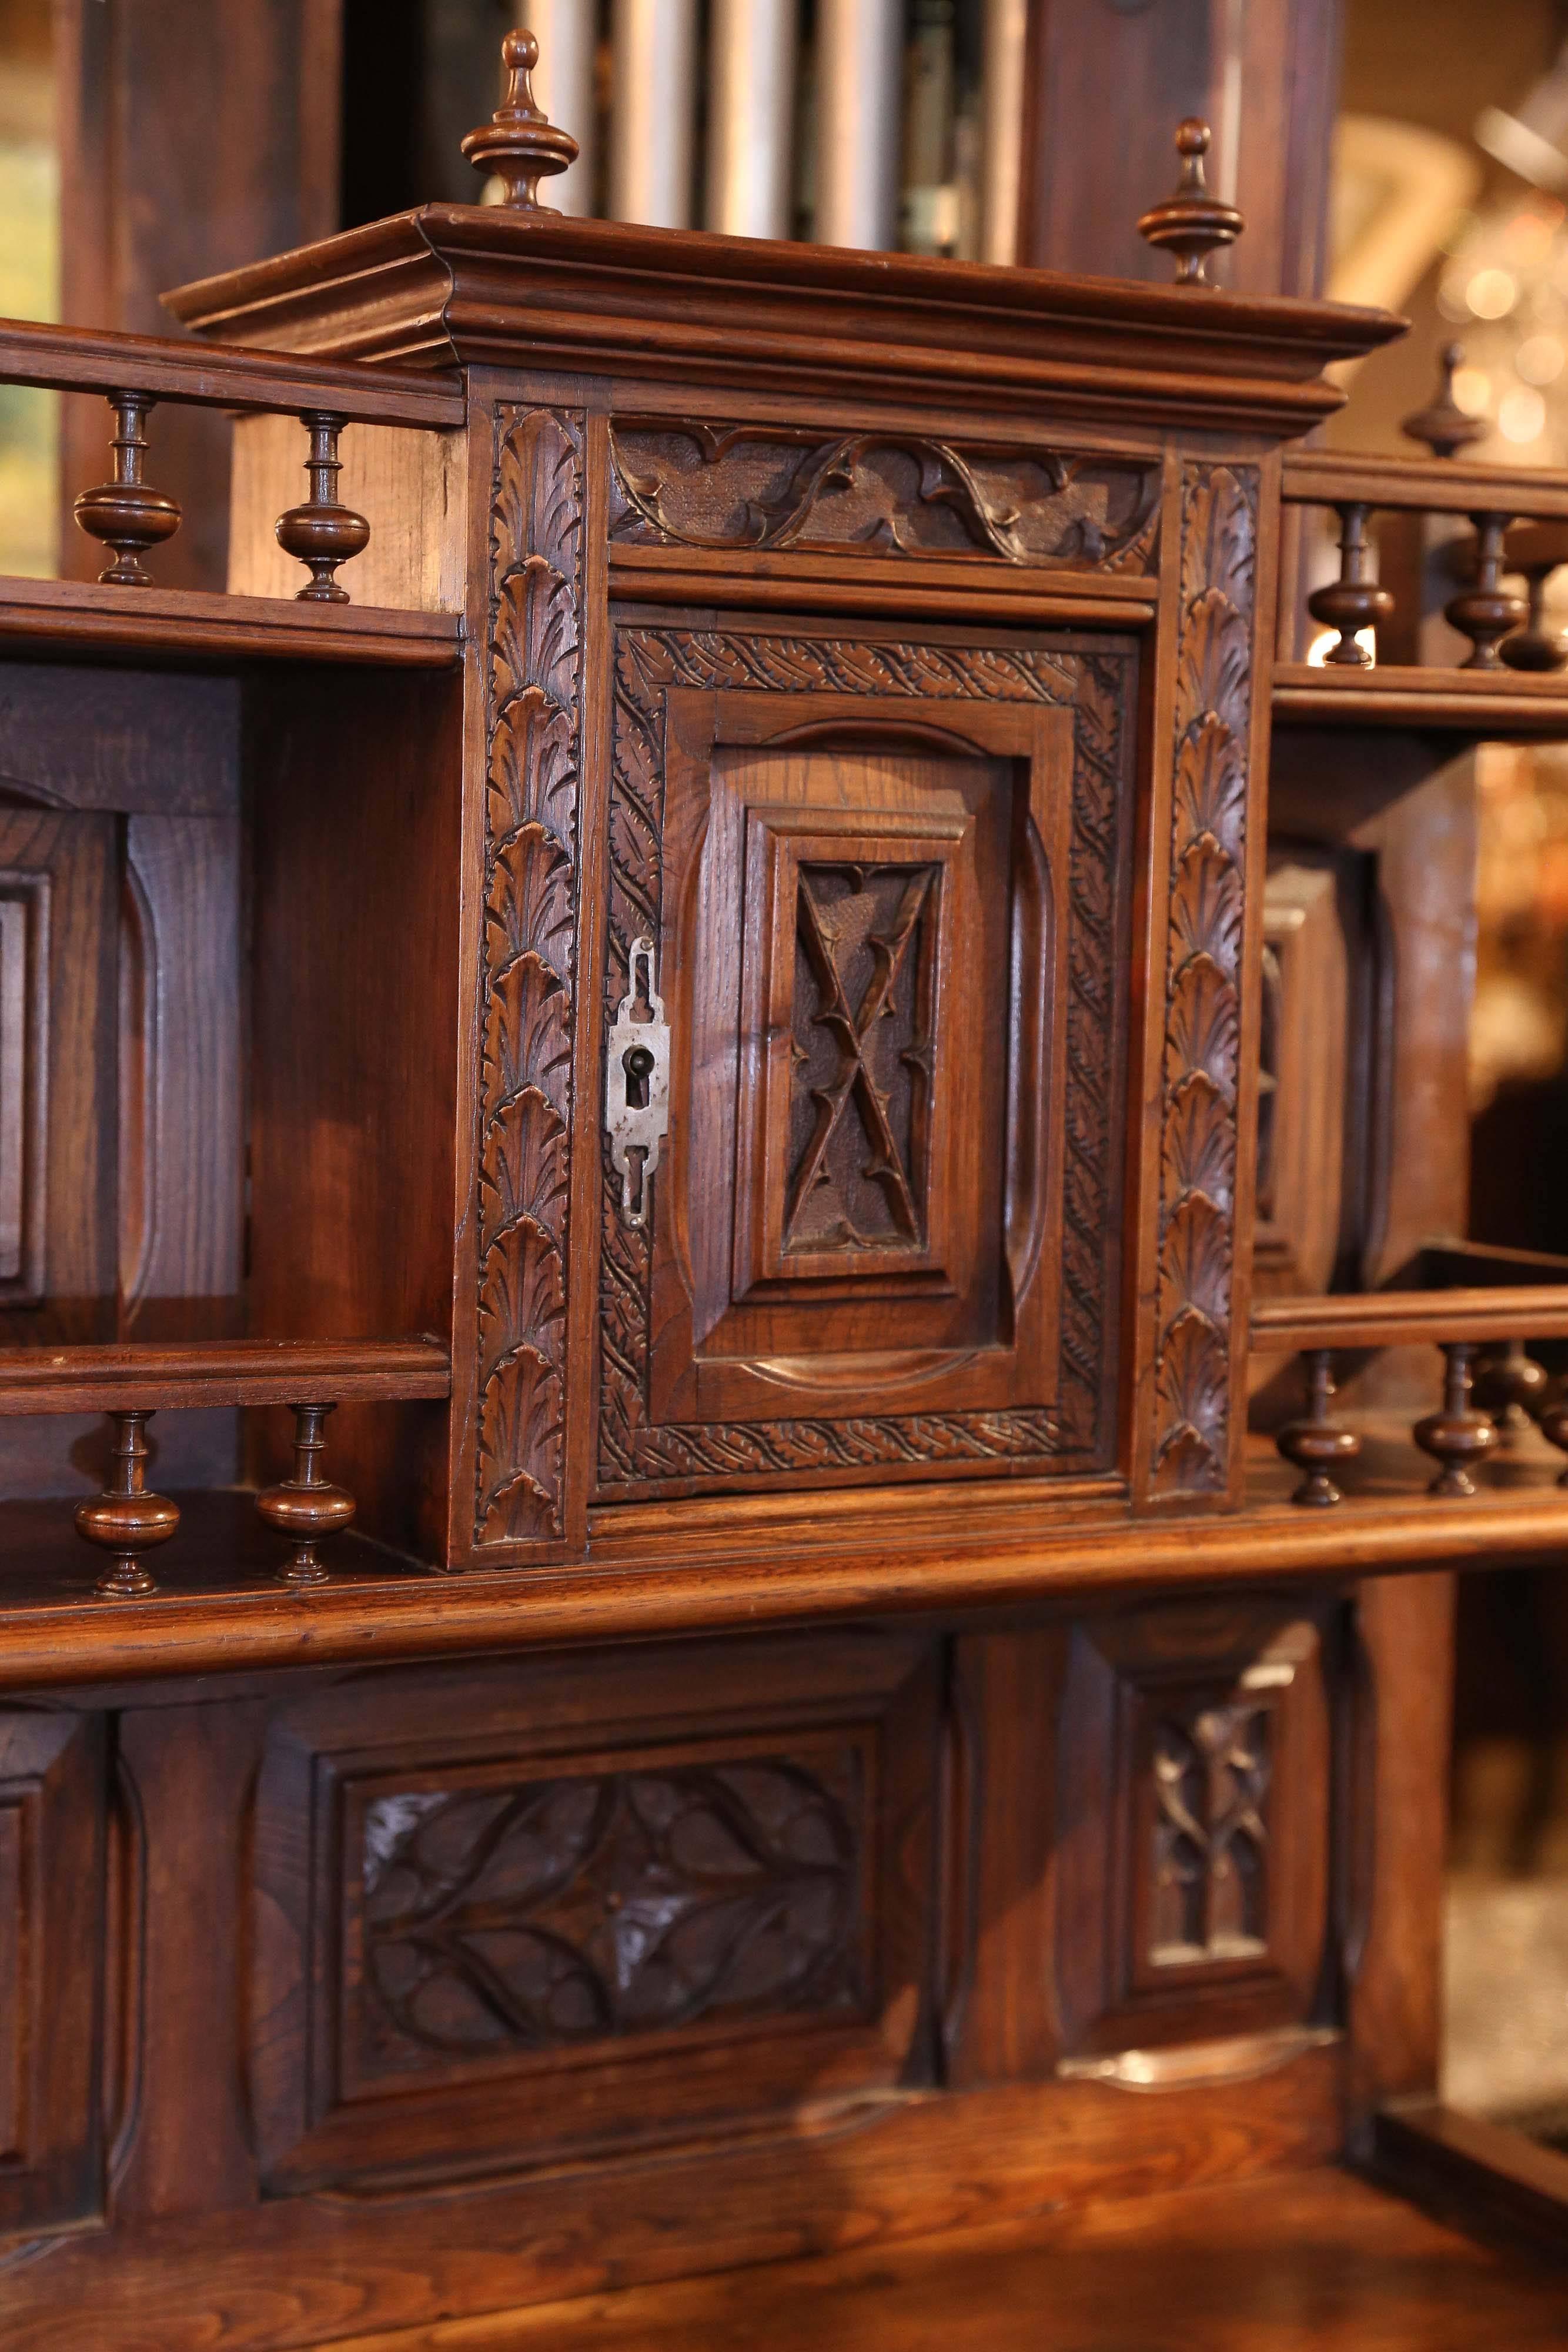 French cabinet made of walnut with lovely carving.
It has an upper structure with a petite door.
It has one drawer and has two lower doors. 
It has barley twist posts that are beautifully constructed.
Carved doors and leaf like carvings adorn